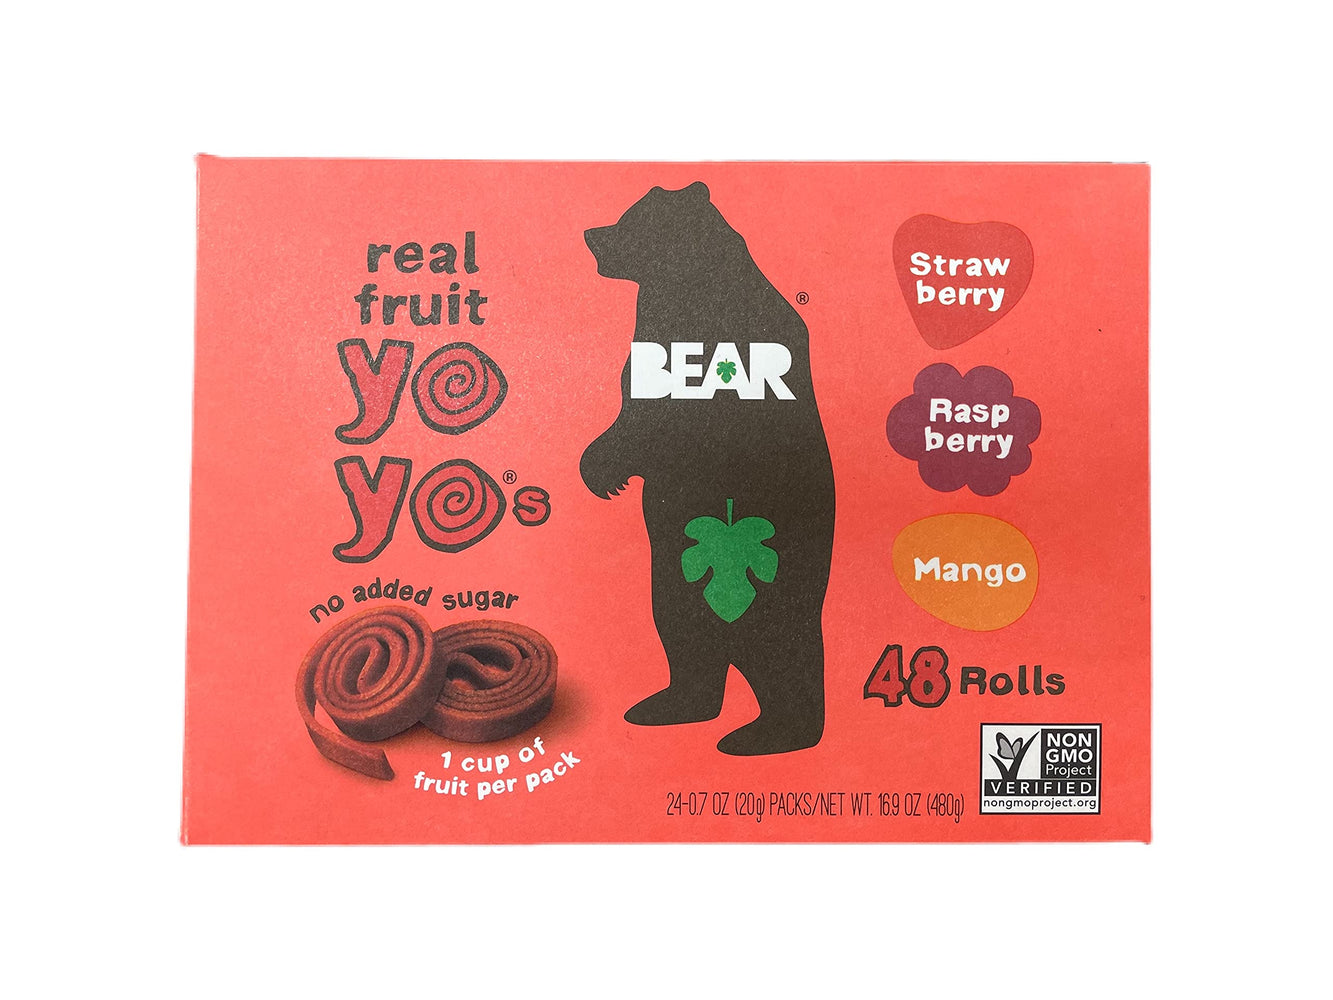 BEAR THE BIG CAVE Yoyos Fruit Rolls, Mango, Raspberry, Strawberry, 24 Count 48 Count (Pack of 1)